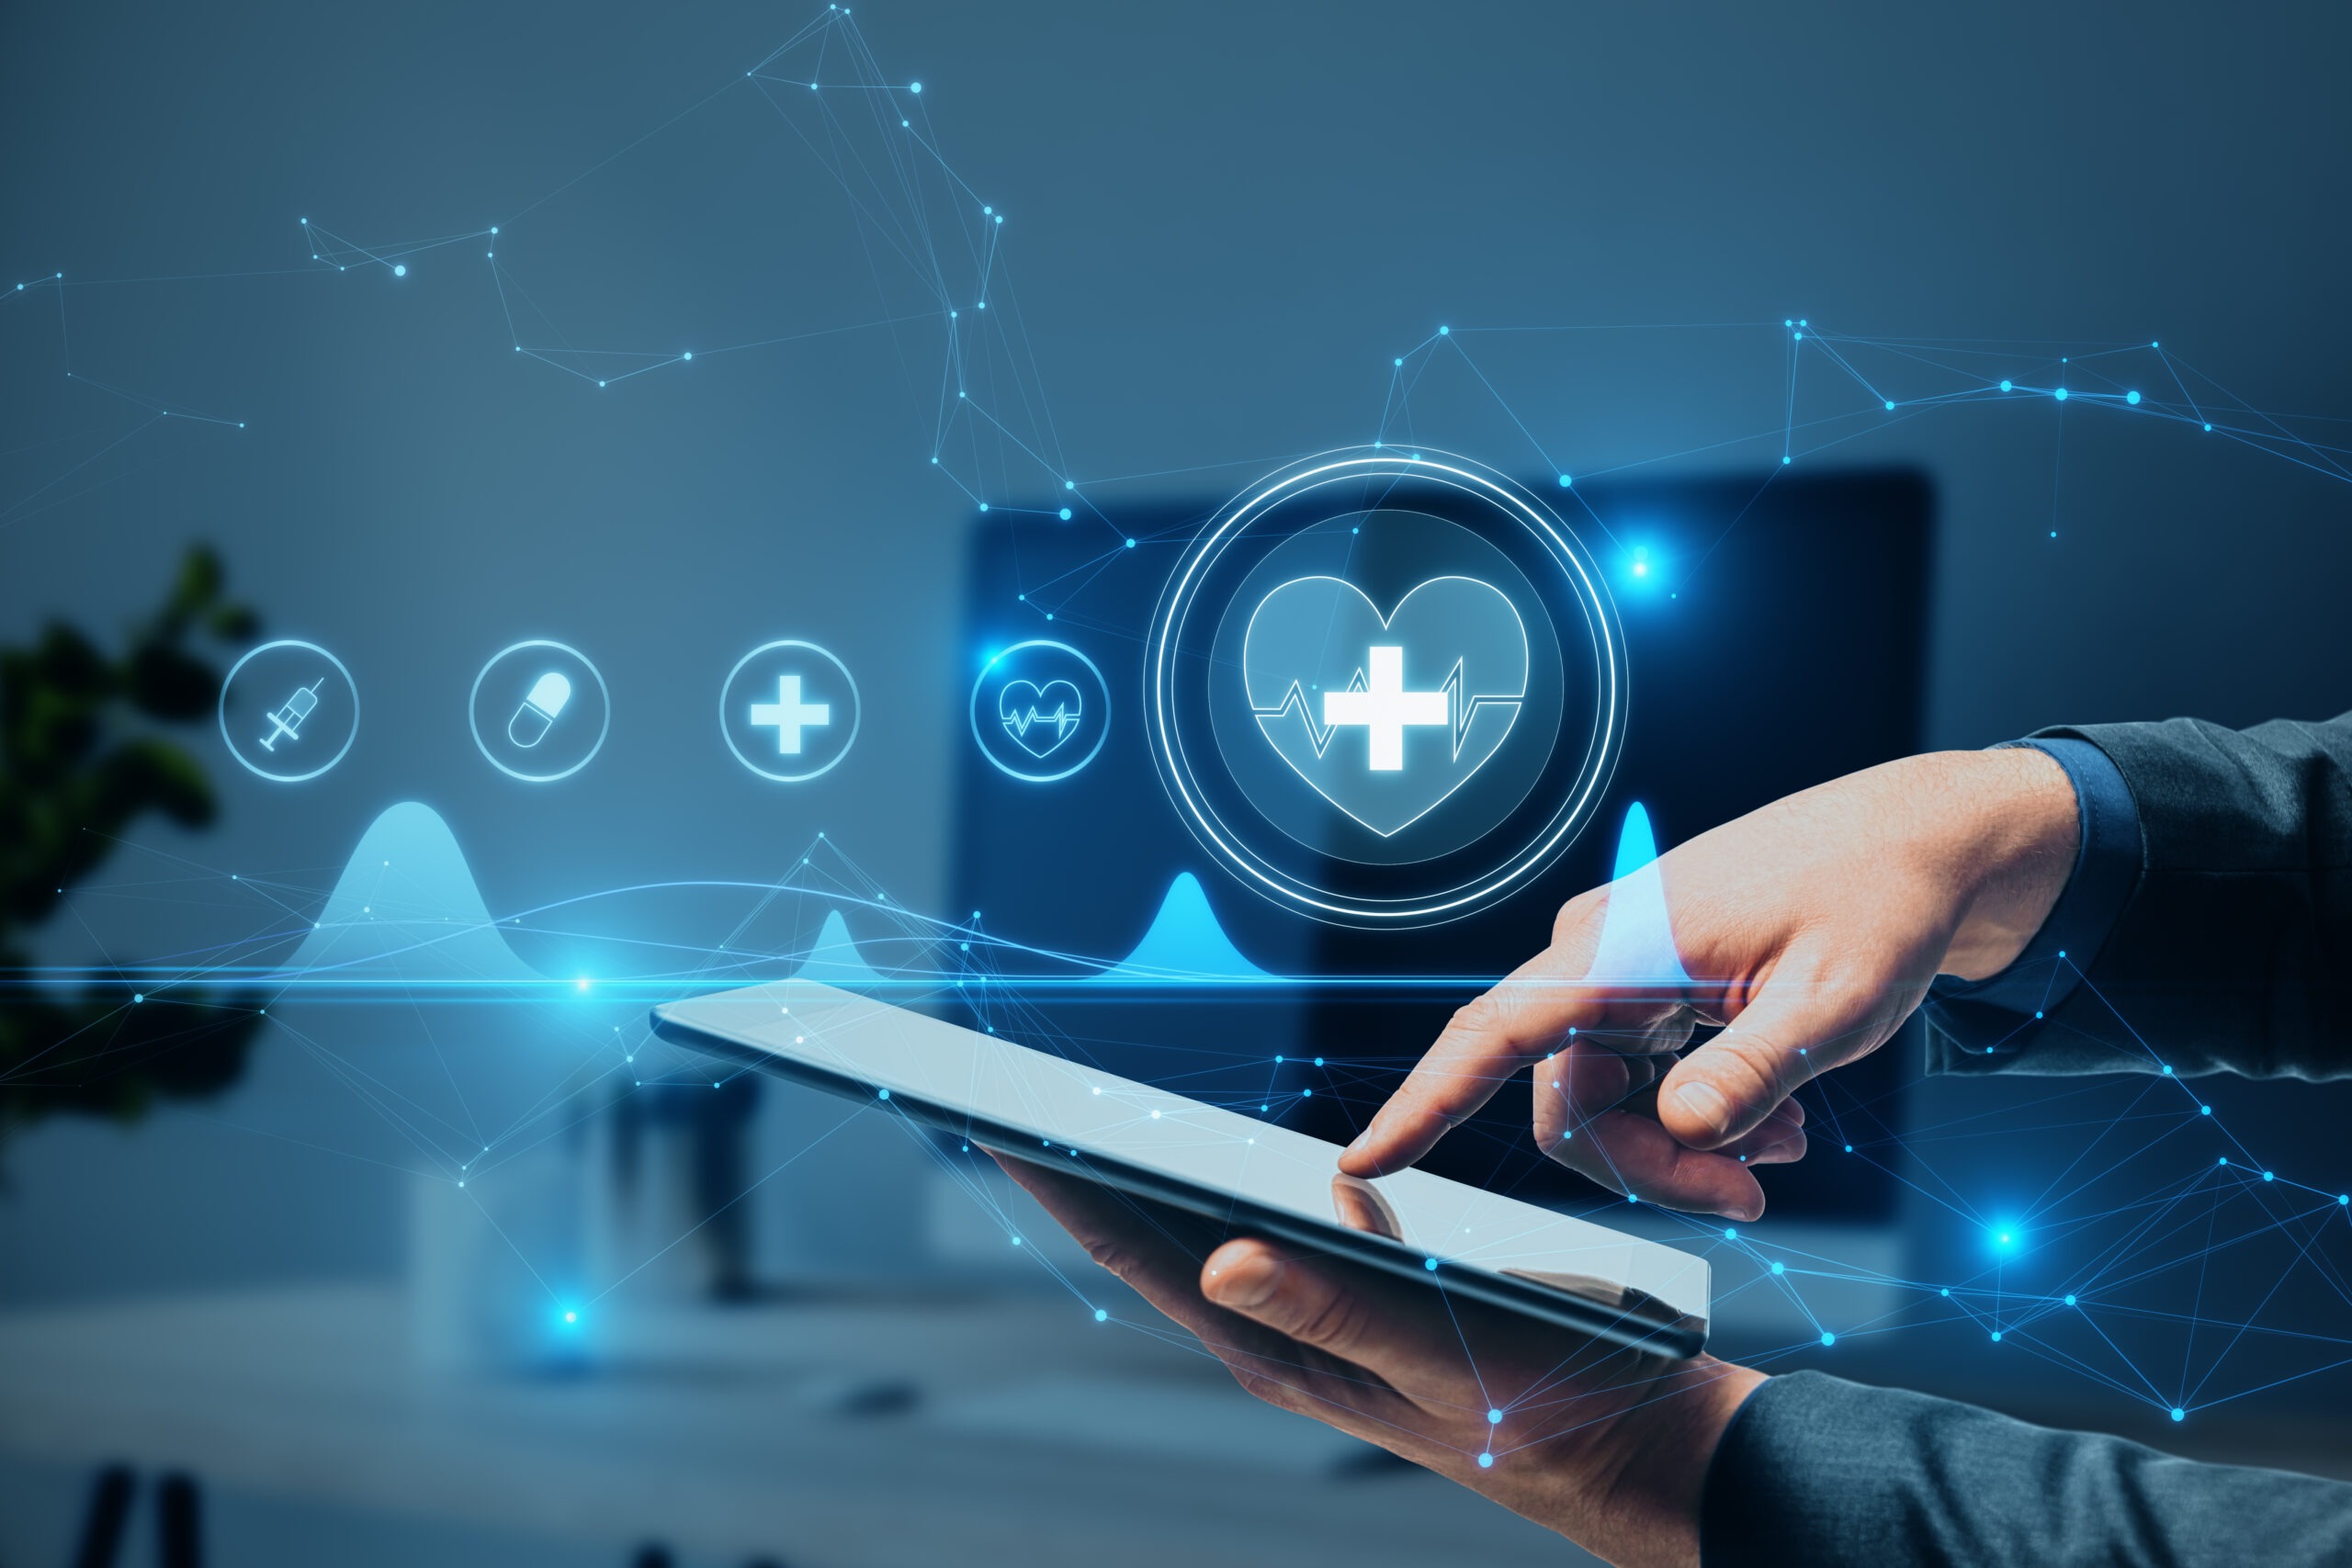 medical-interface-hologram-blurry-hospital-office-interior-background-online-healthcare-cardiology-technology-concept-scaled